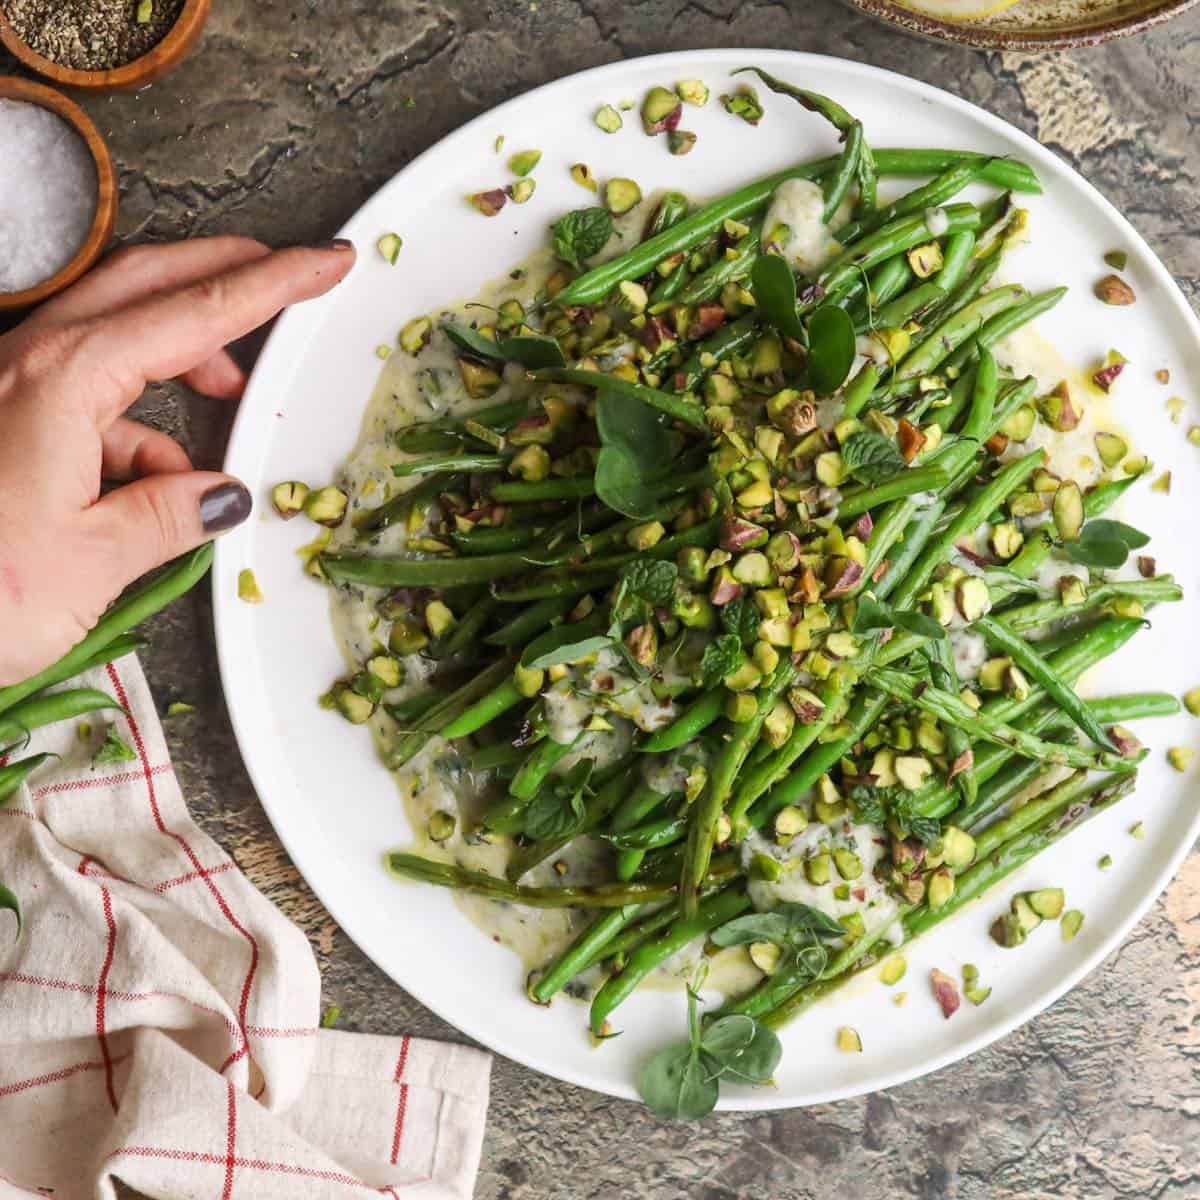 Grilled green bean salad on a bed of yogurt and mint dressing, garnished with pistachios, presented on a plate.